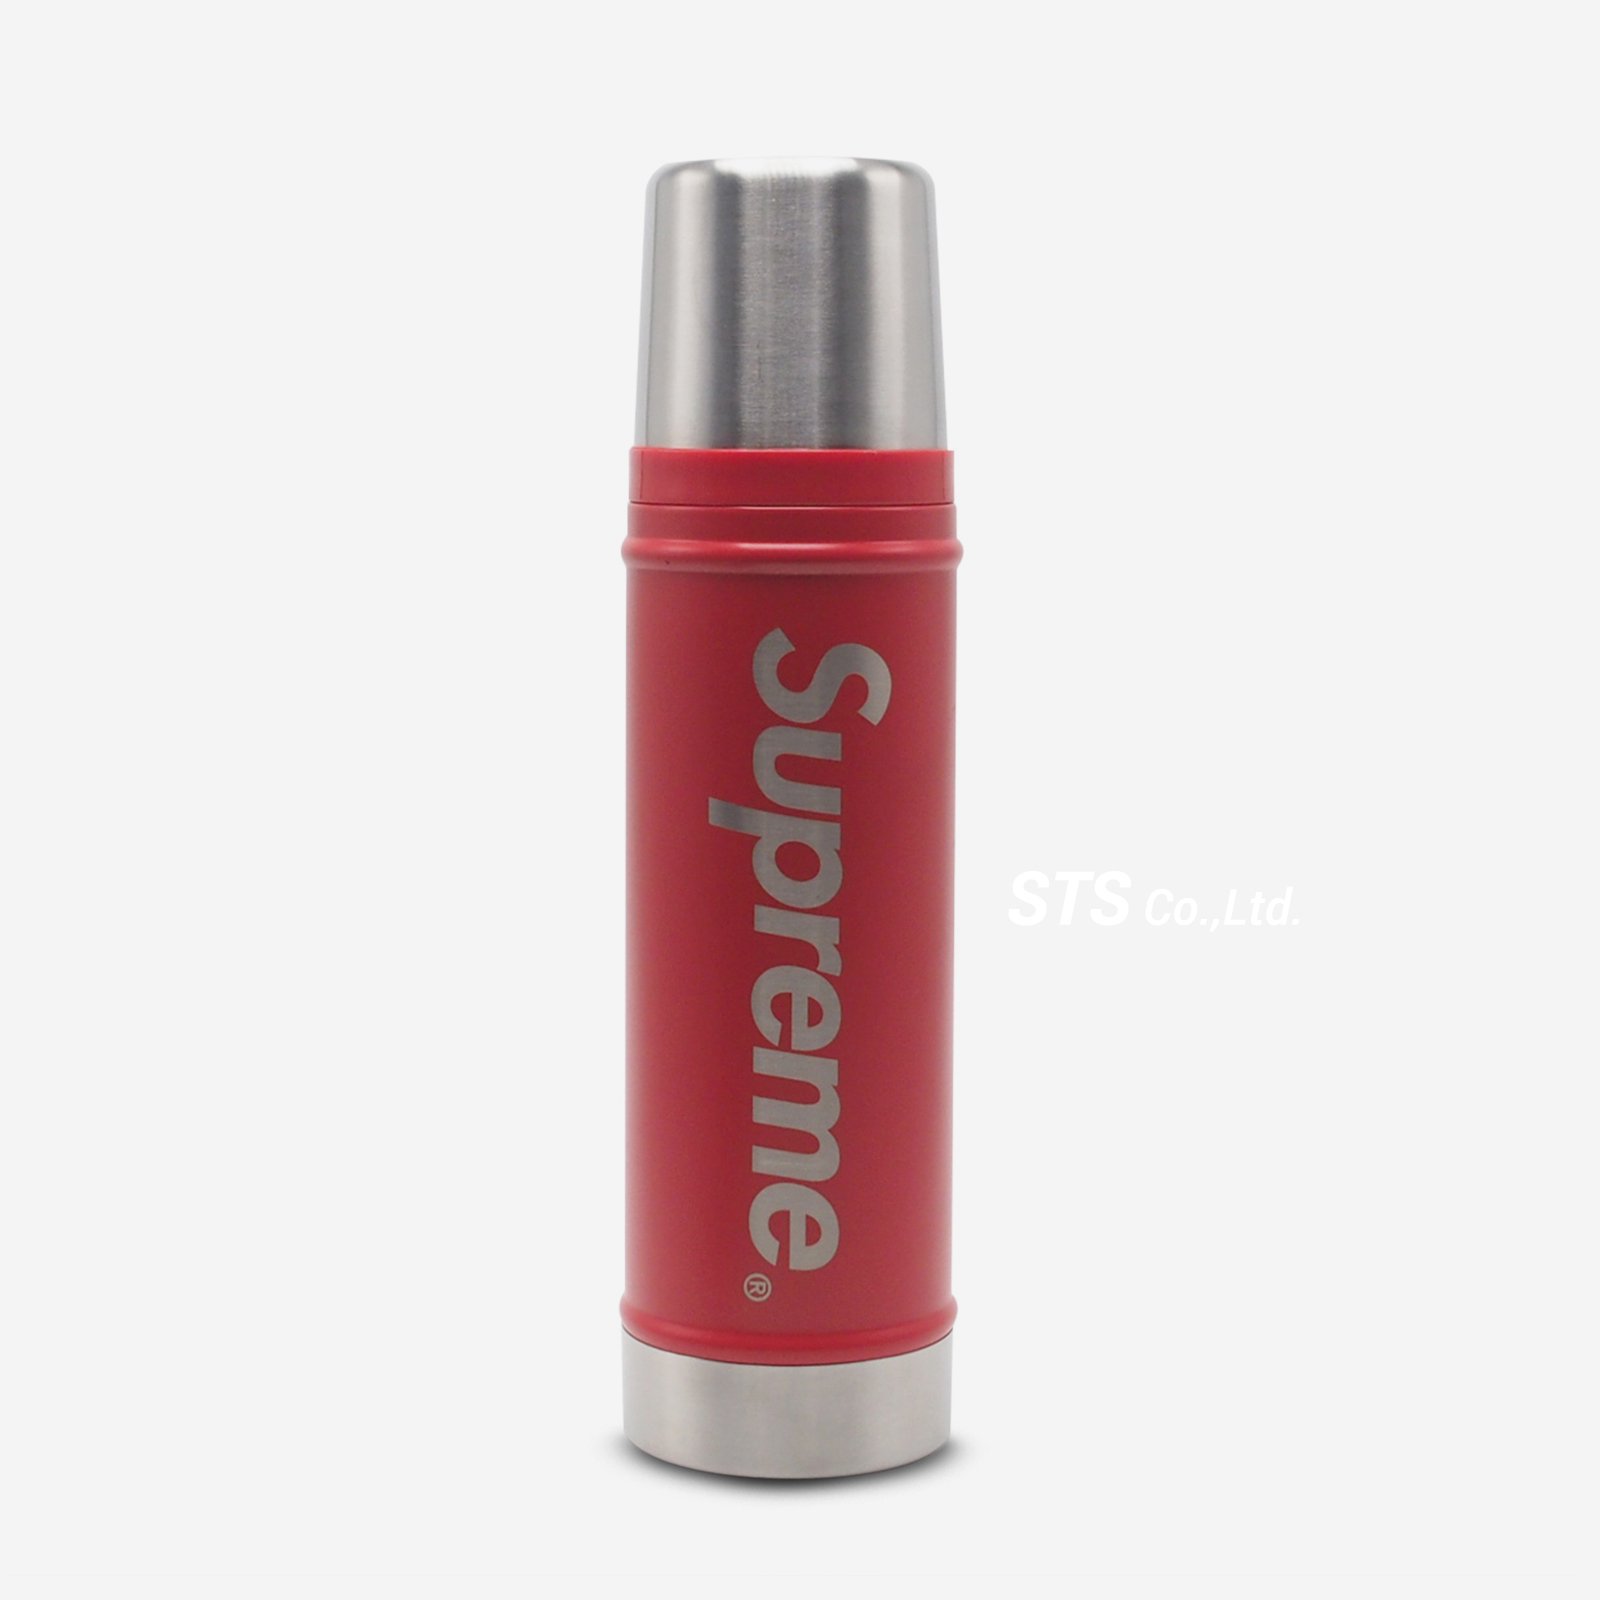 Supreme Stanley Vacuum Insulated Bottle